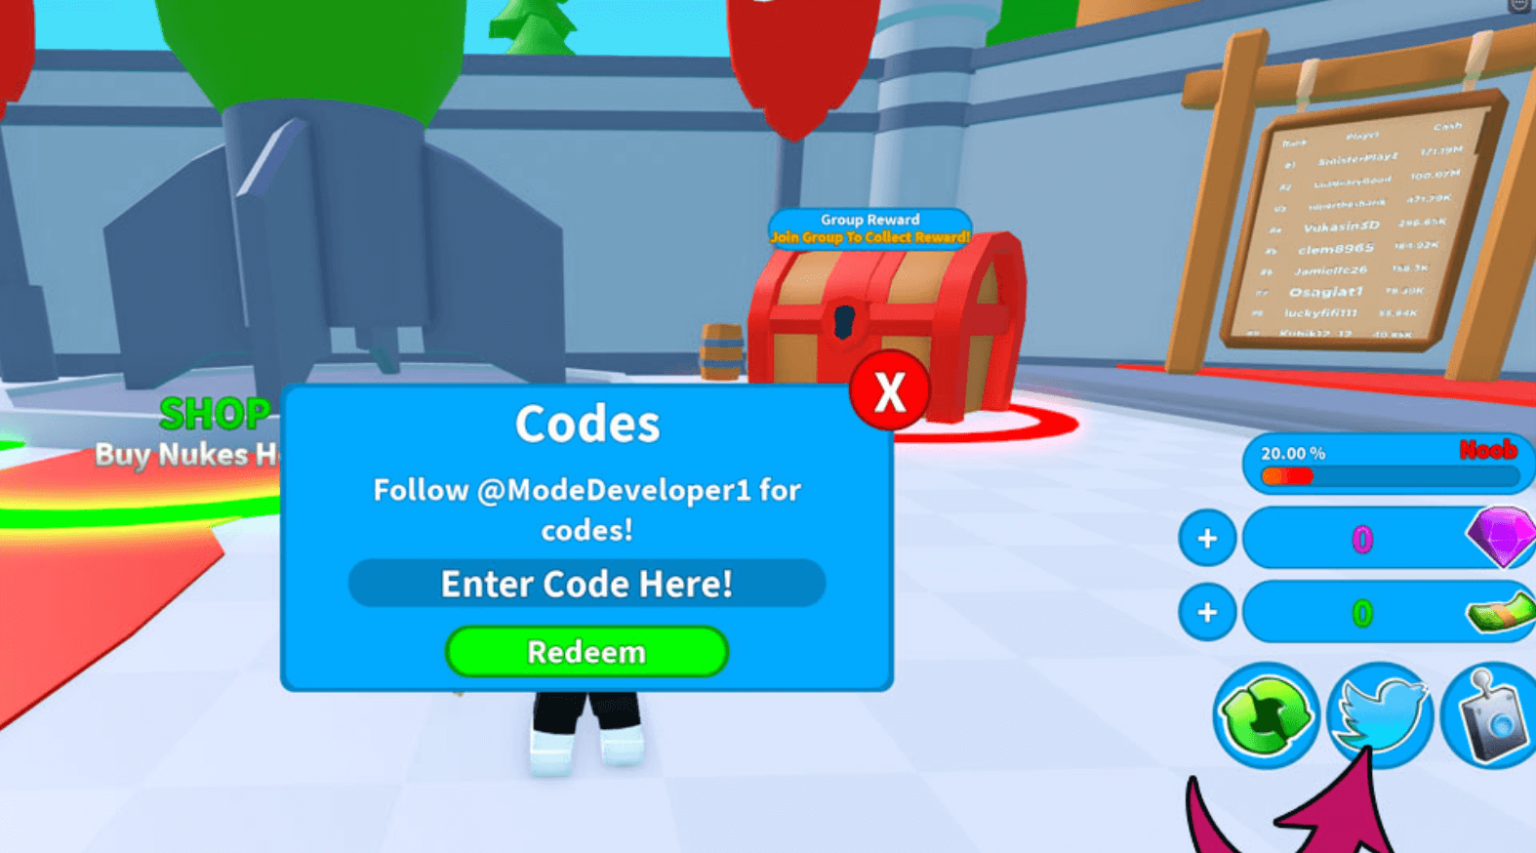 Boom Simulator Codes 2023 Get Free Rewards Pets Coin And More